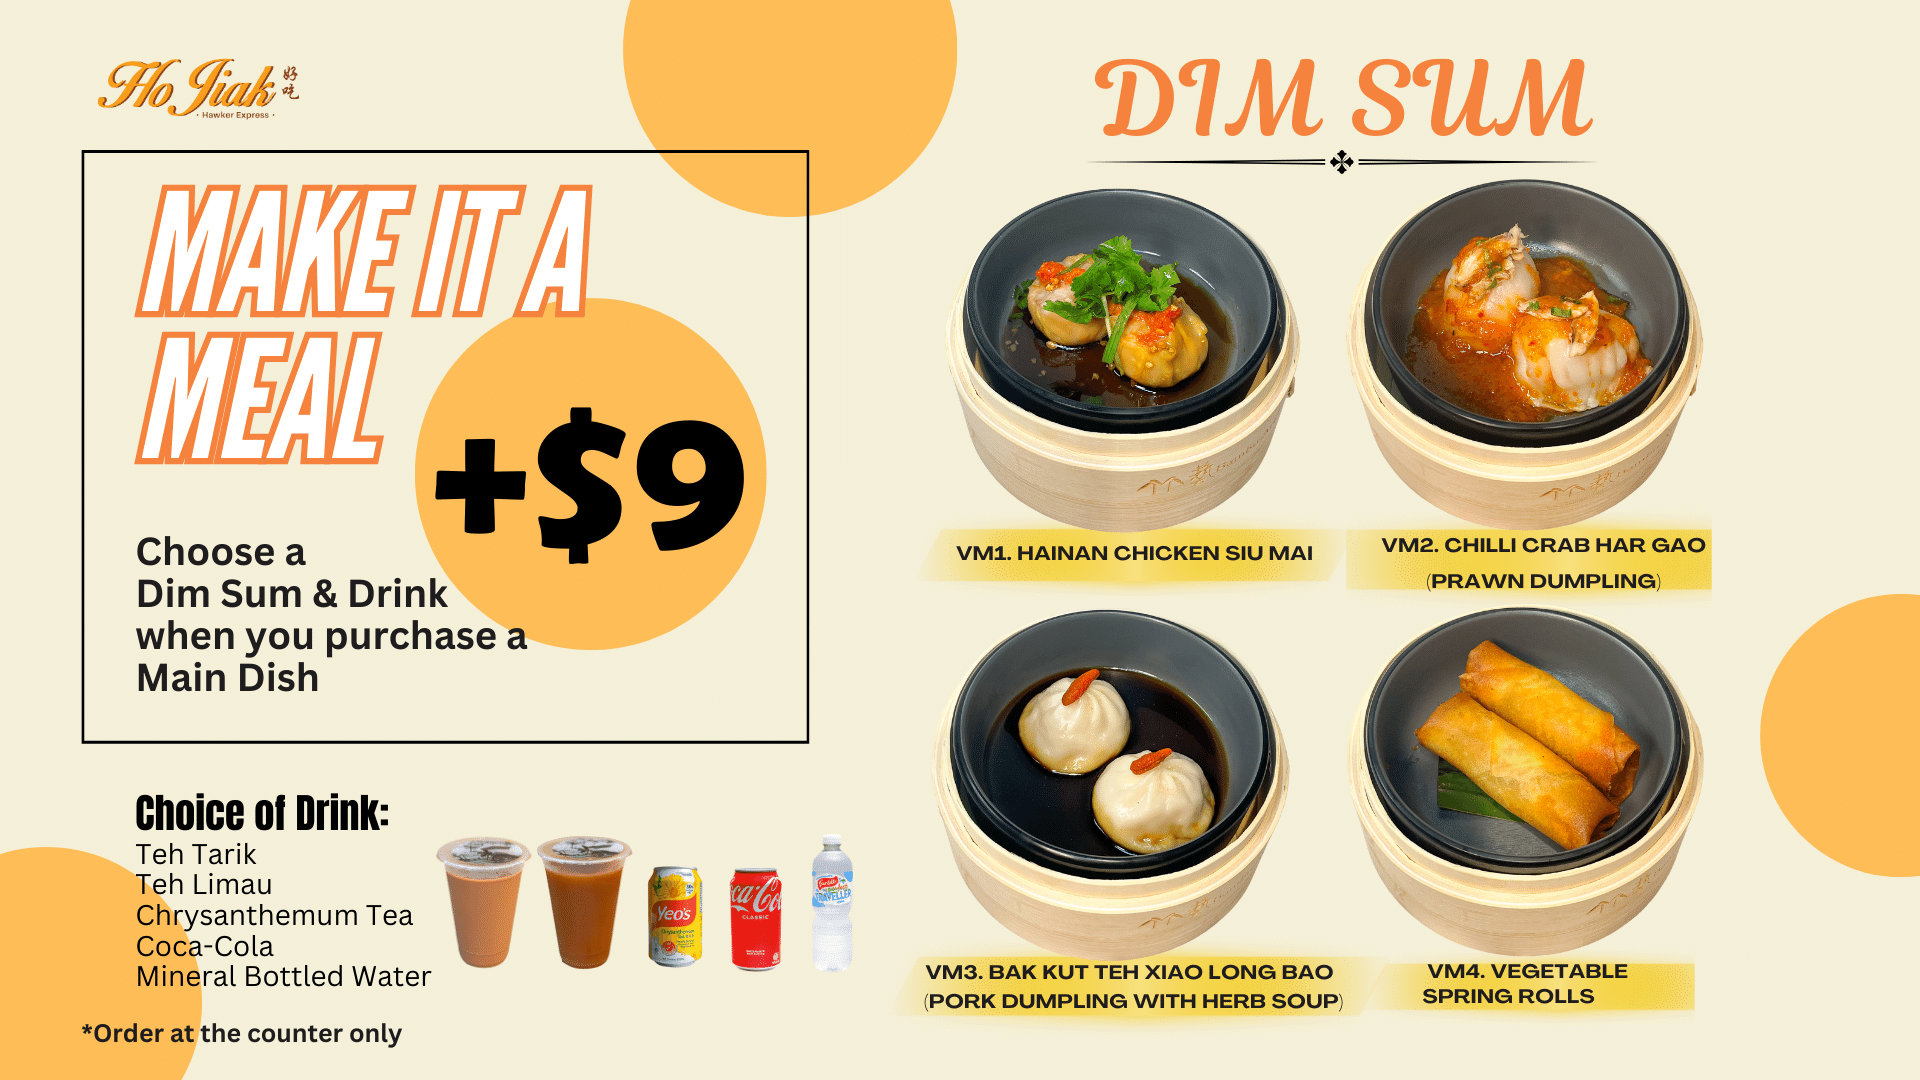 Make it a meal for just +$9 with our delicious dim sum and selected drinks!